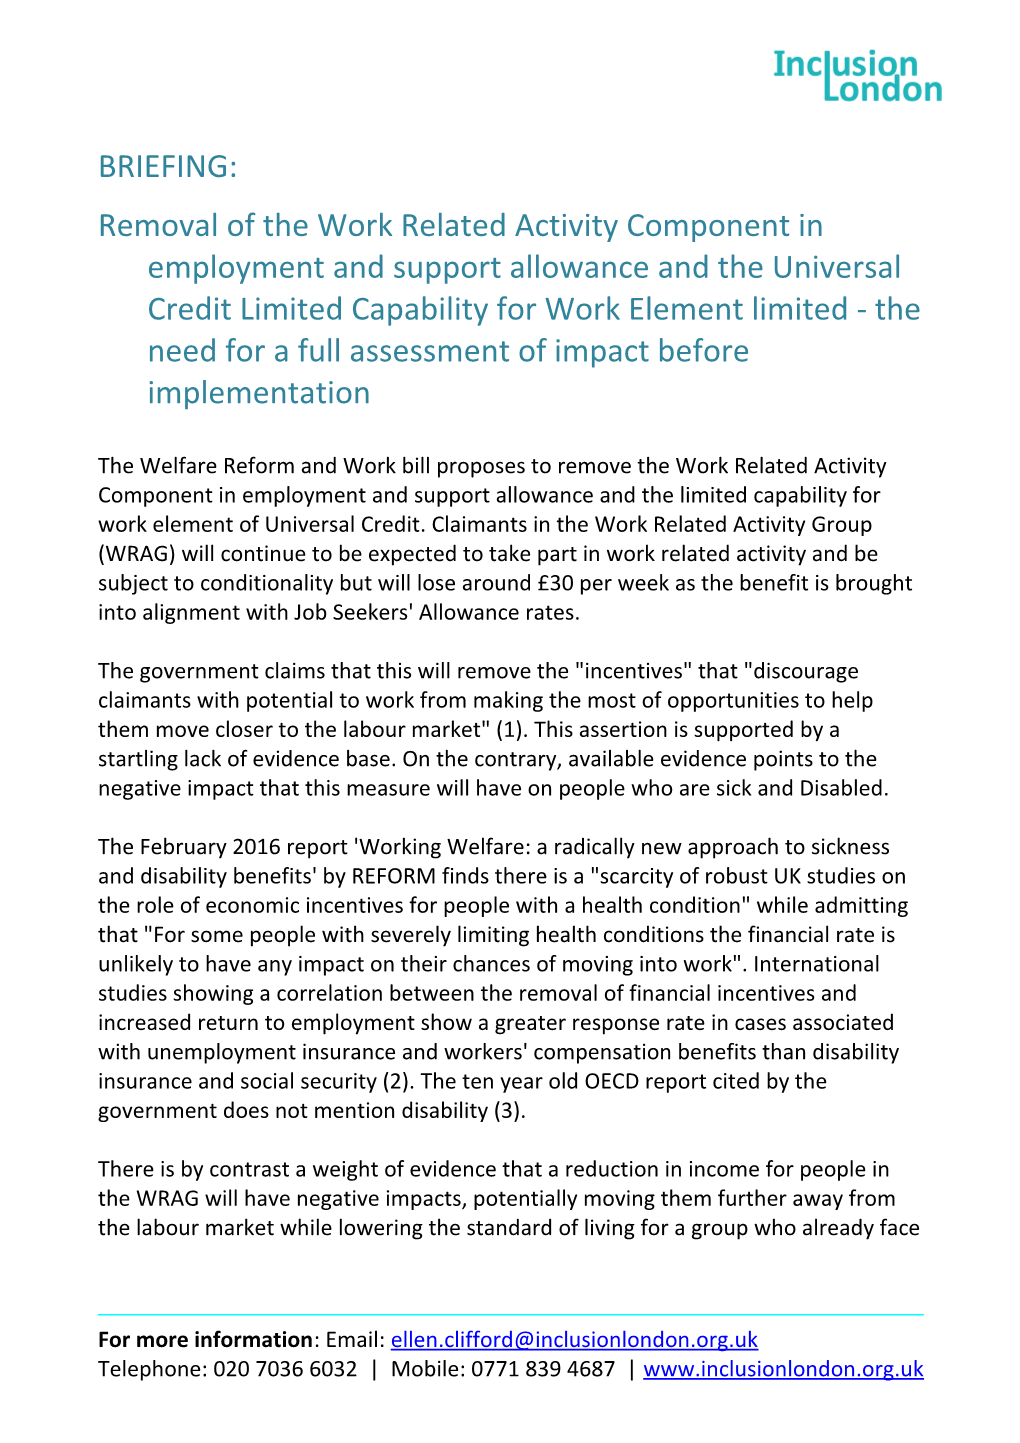 Removal of the Work Related Activity Component in Employment and Support Allowance And